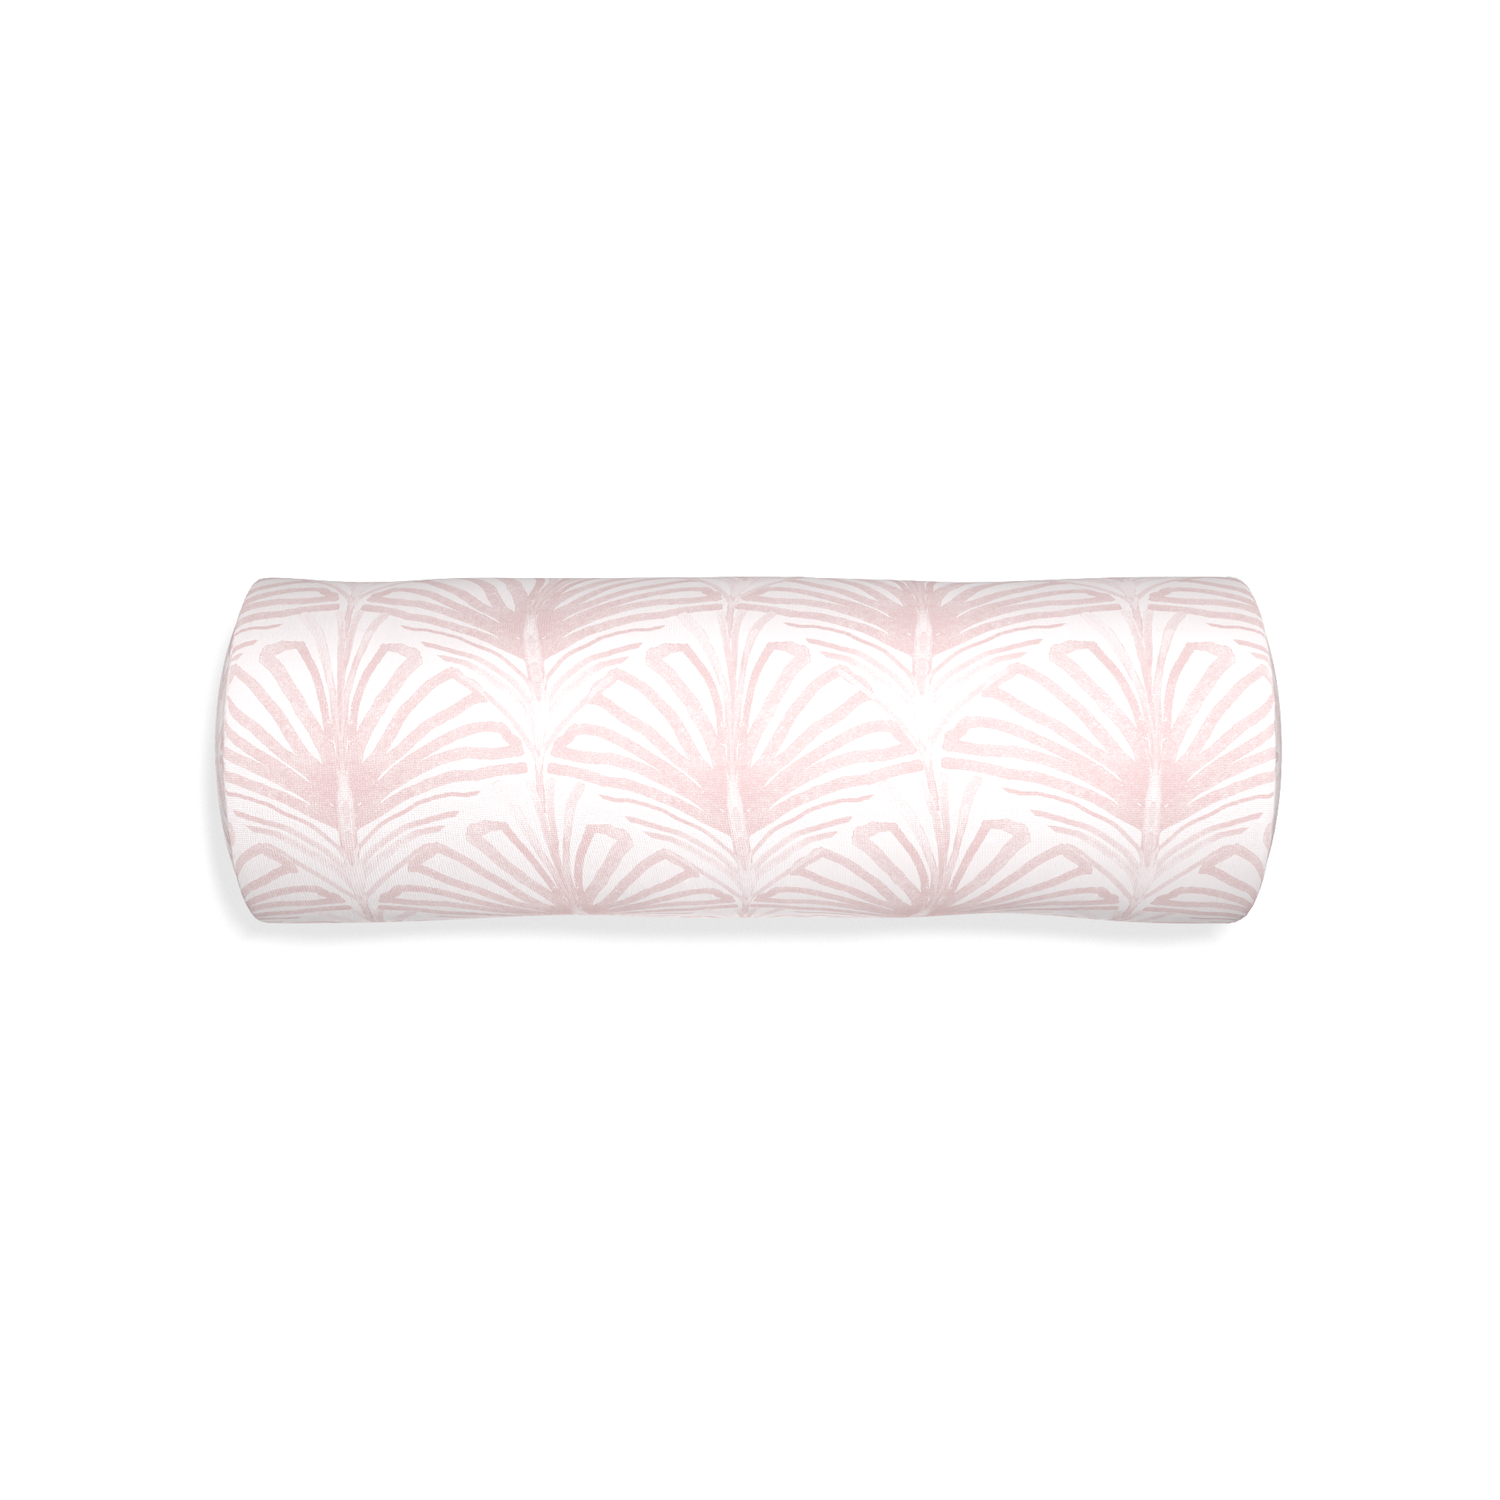 Bolster suzy rose custom pillow with none on white background